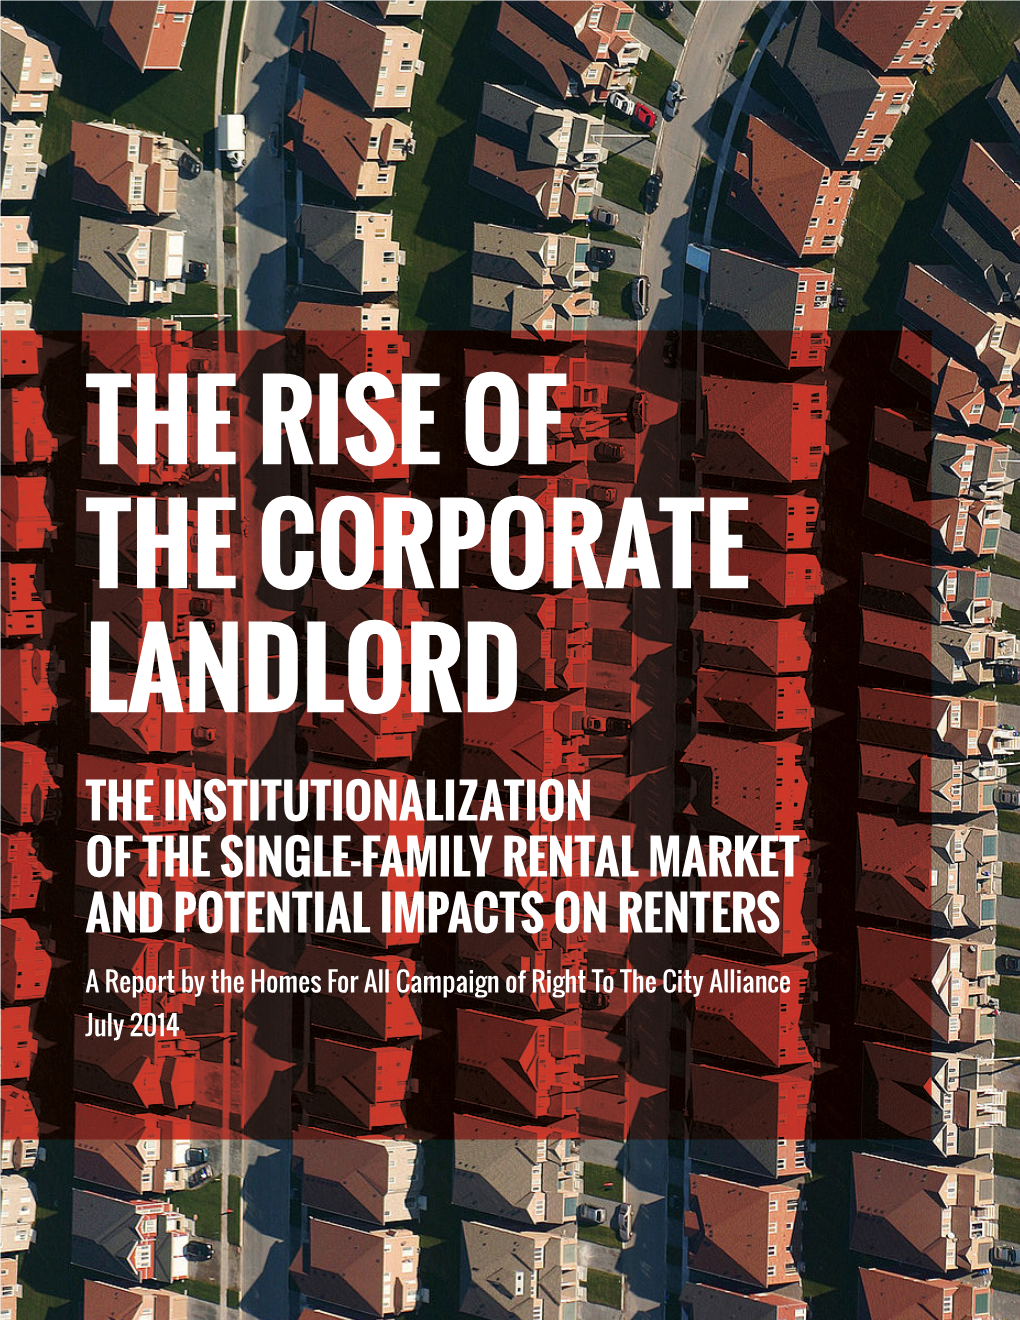 The Rise of the Corporate Landlord